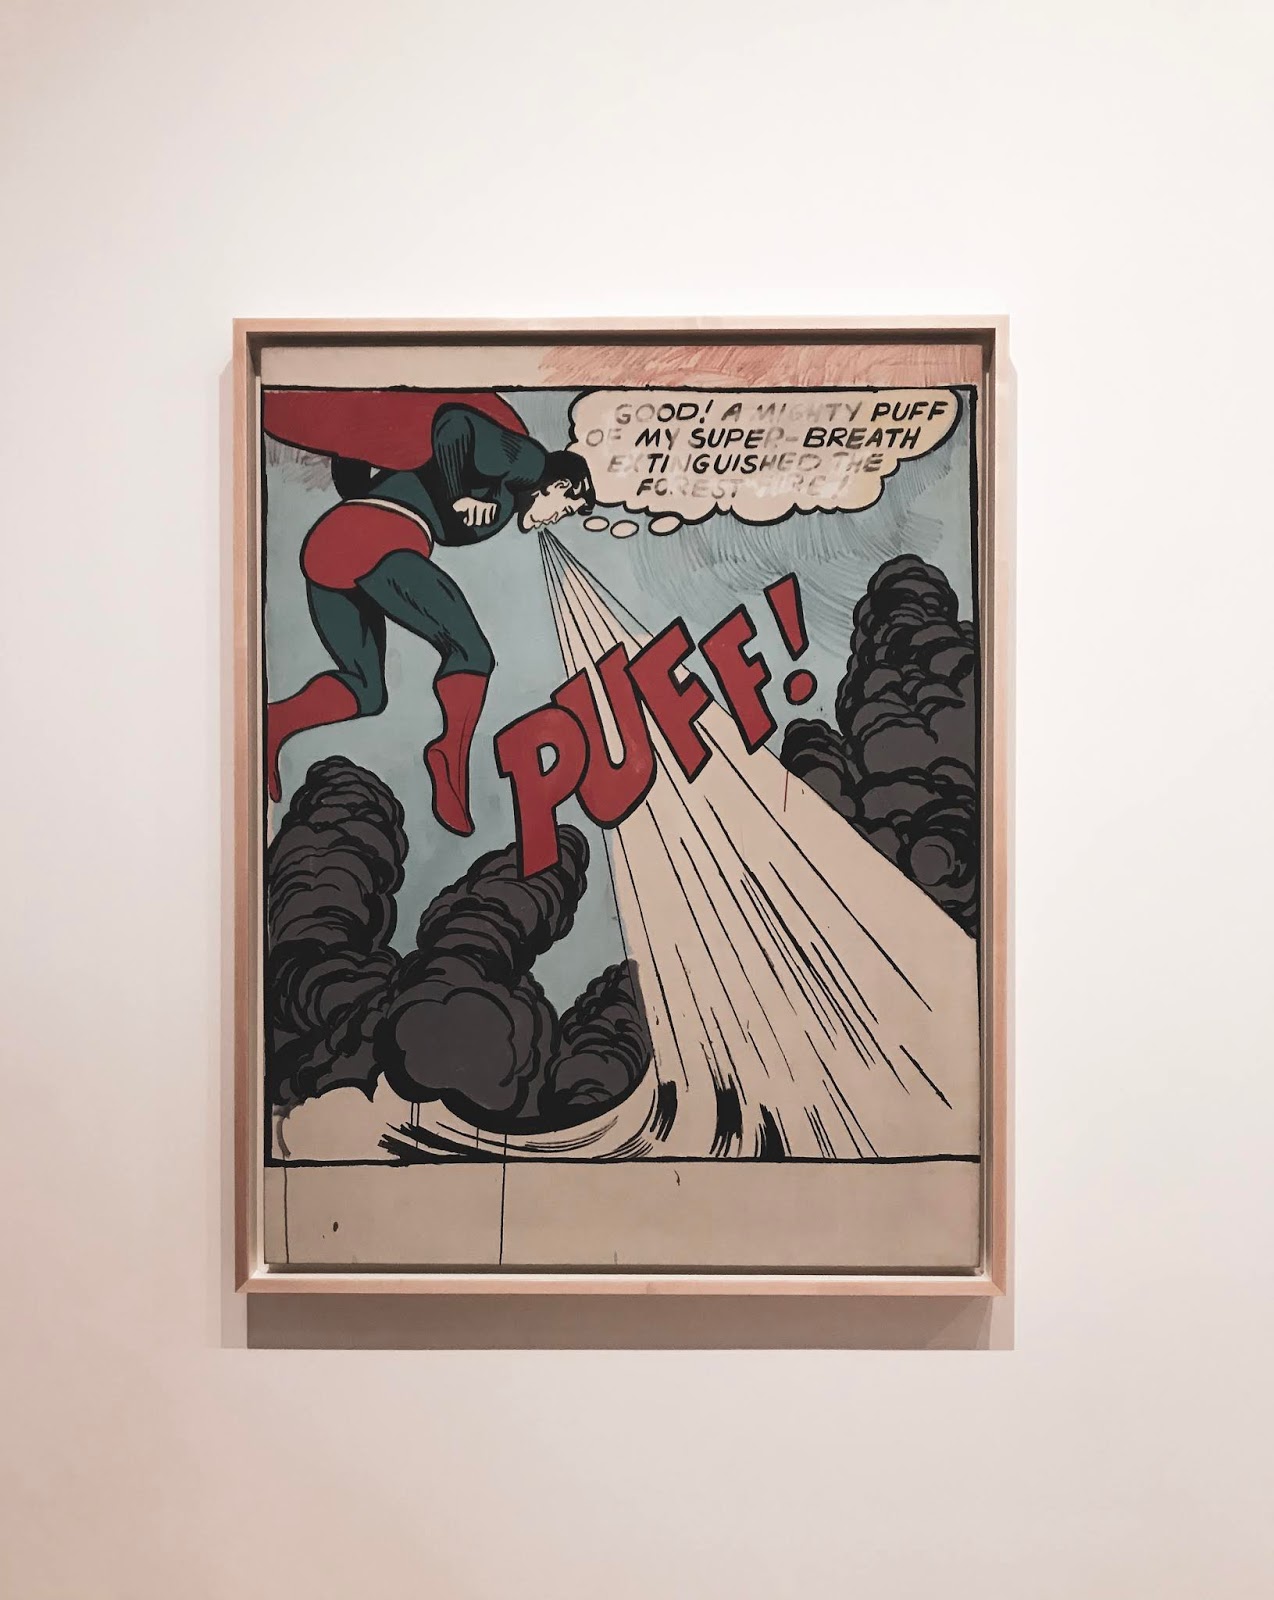 Photoframe where Superman is trying to extinquish wildfire by blowing into it in Whitney Museum of American Art